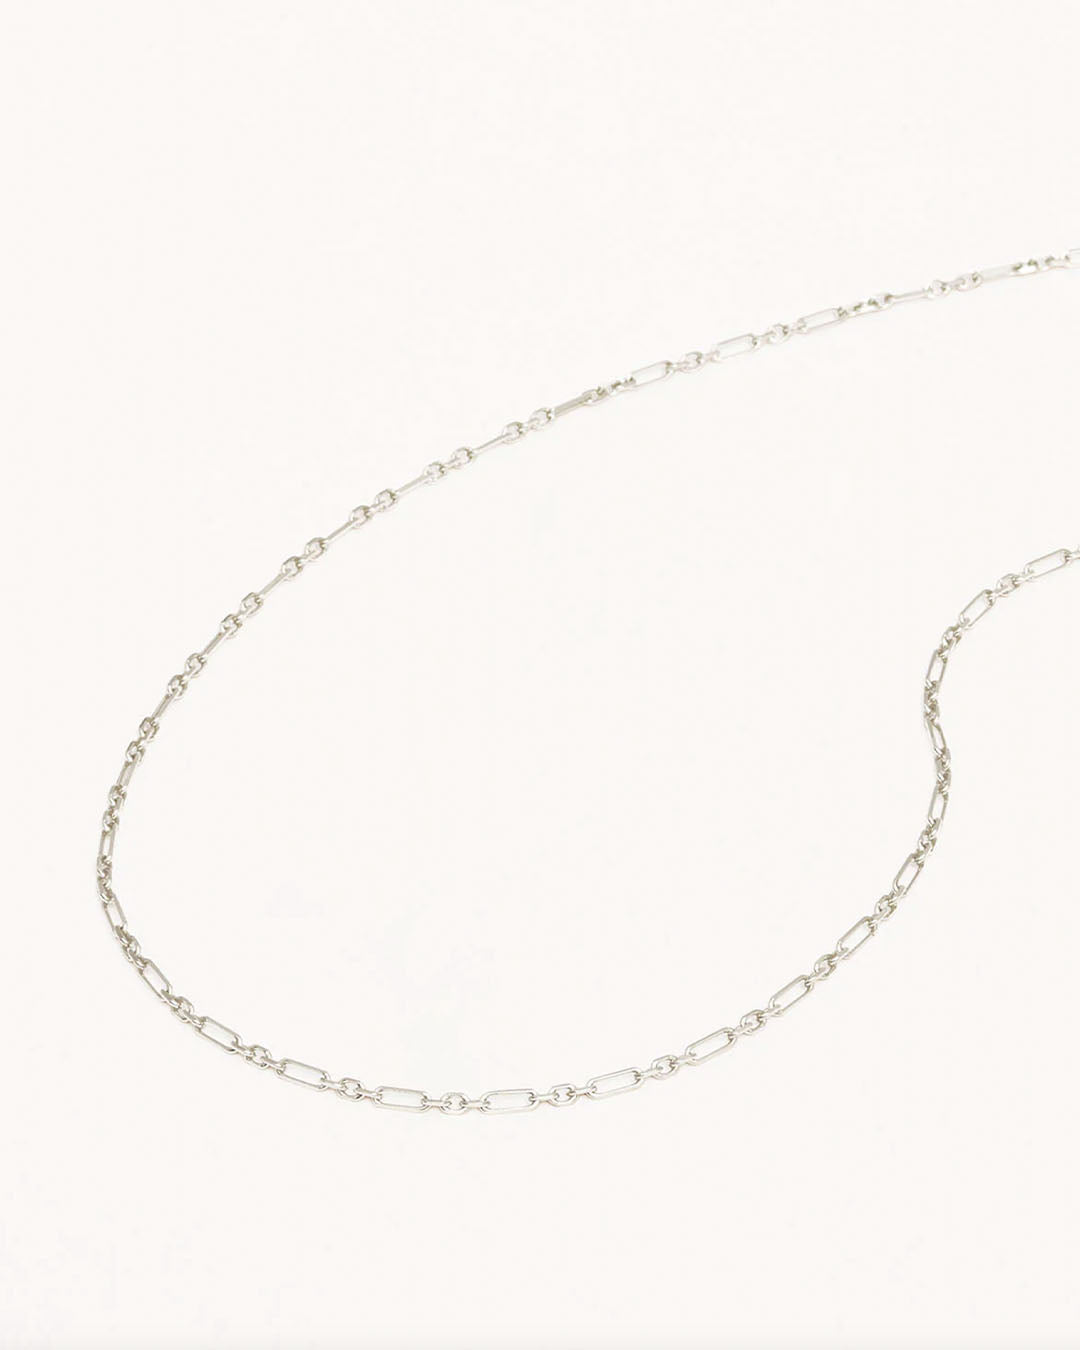 19" Mixed Link Chain Necklace - Sterling Silver Jewellery by By Charlotte - Prae Store